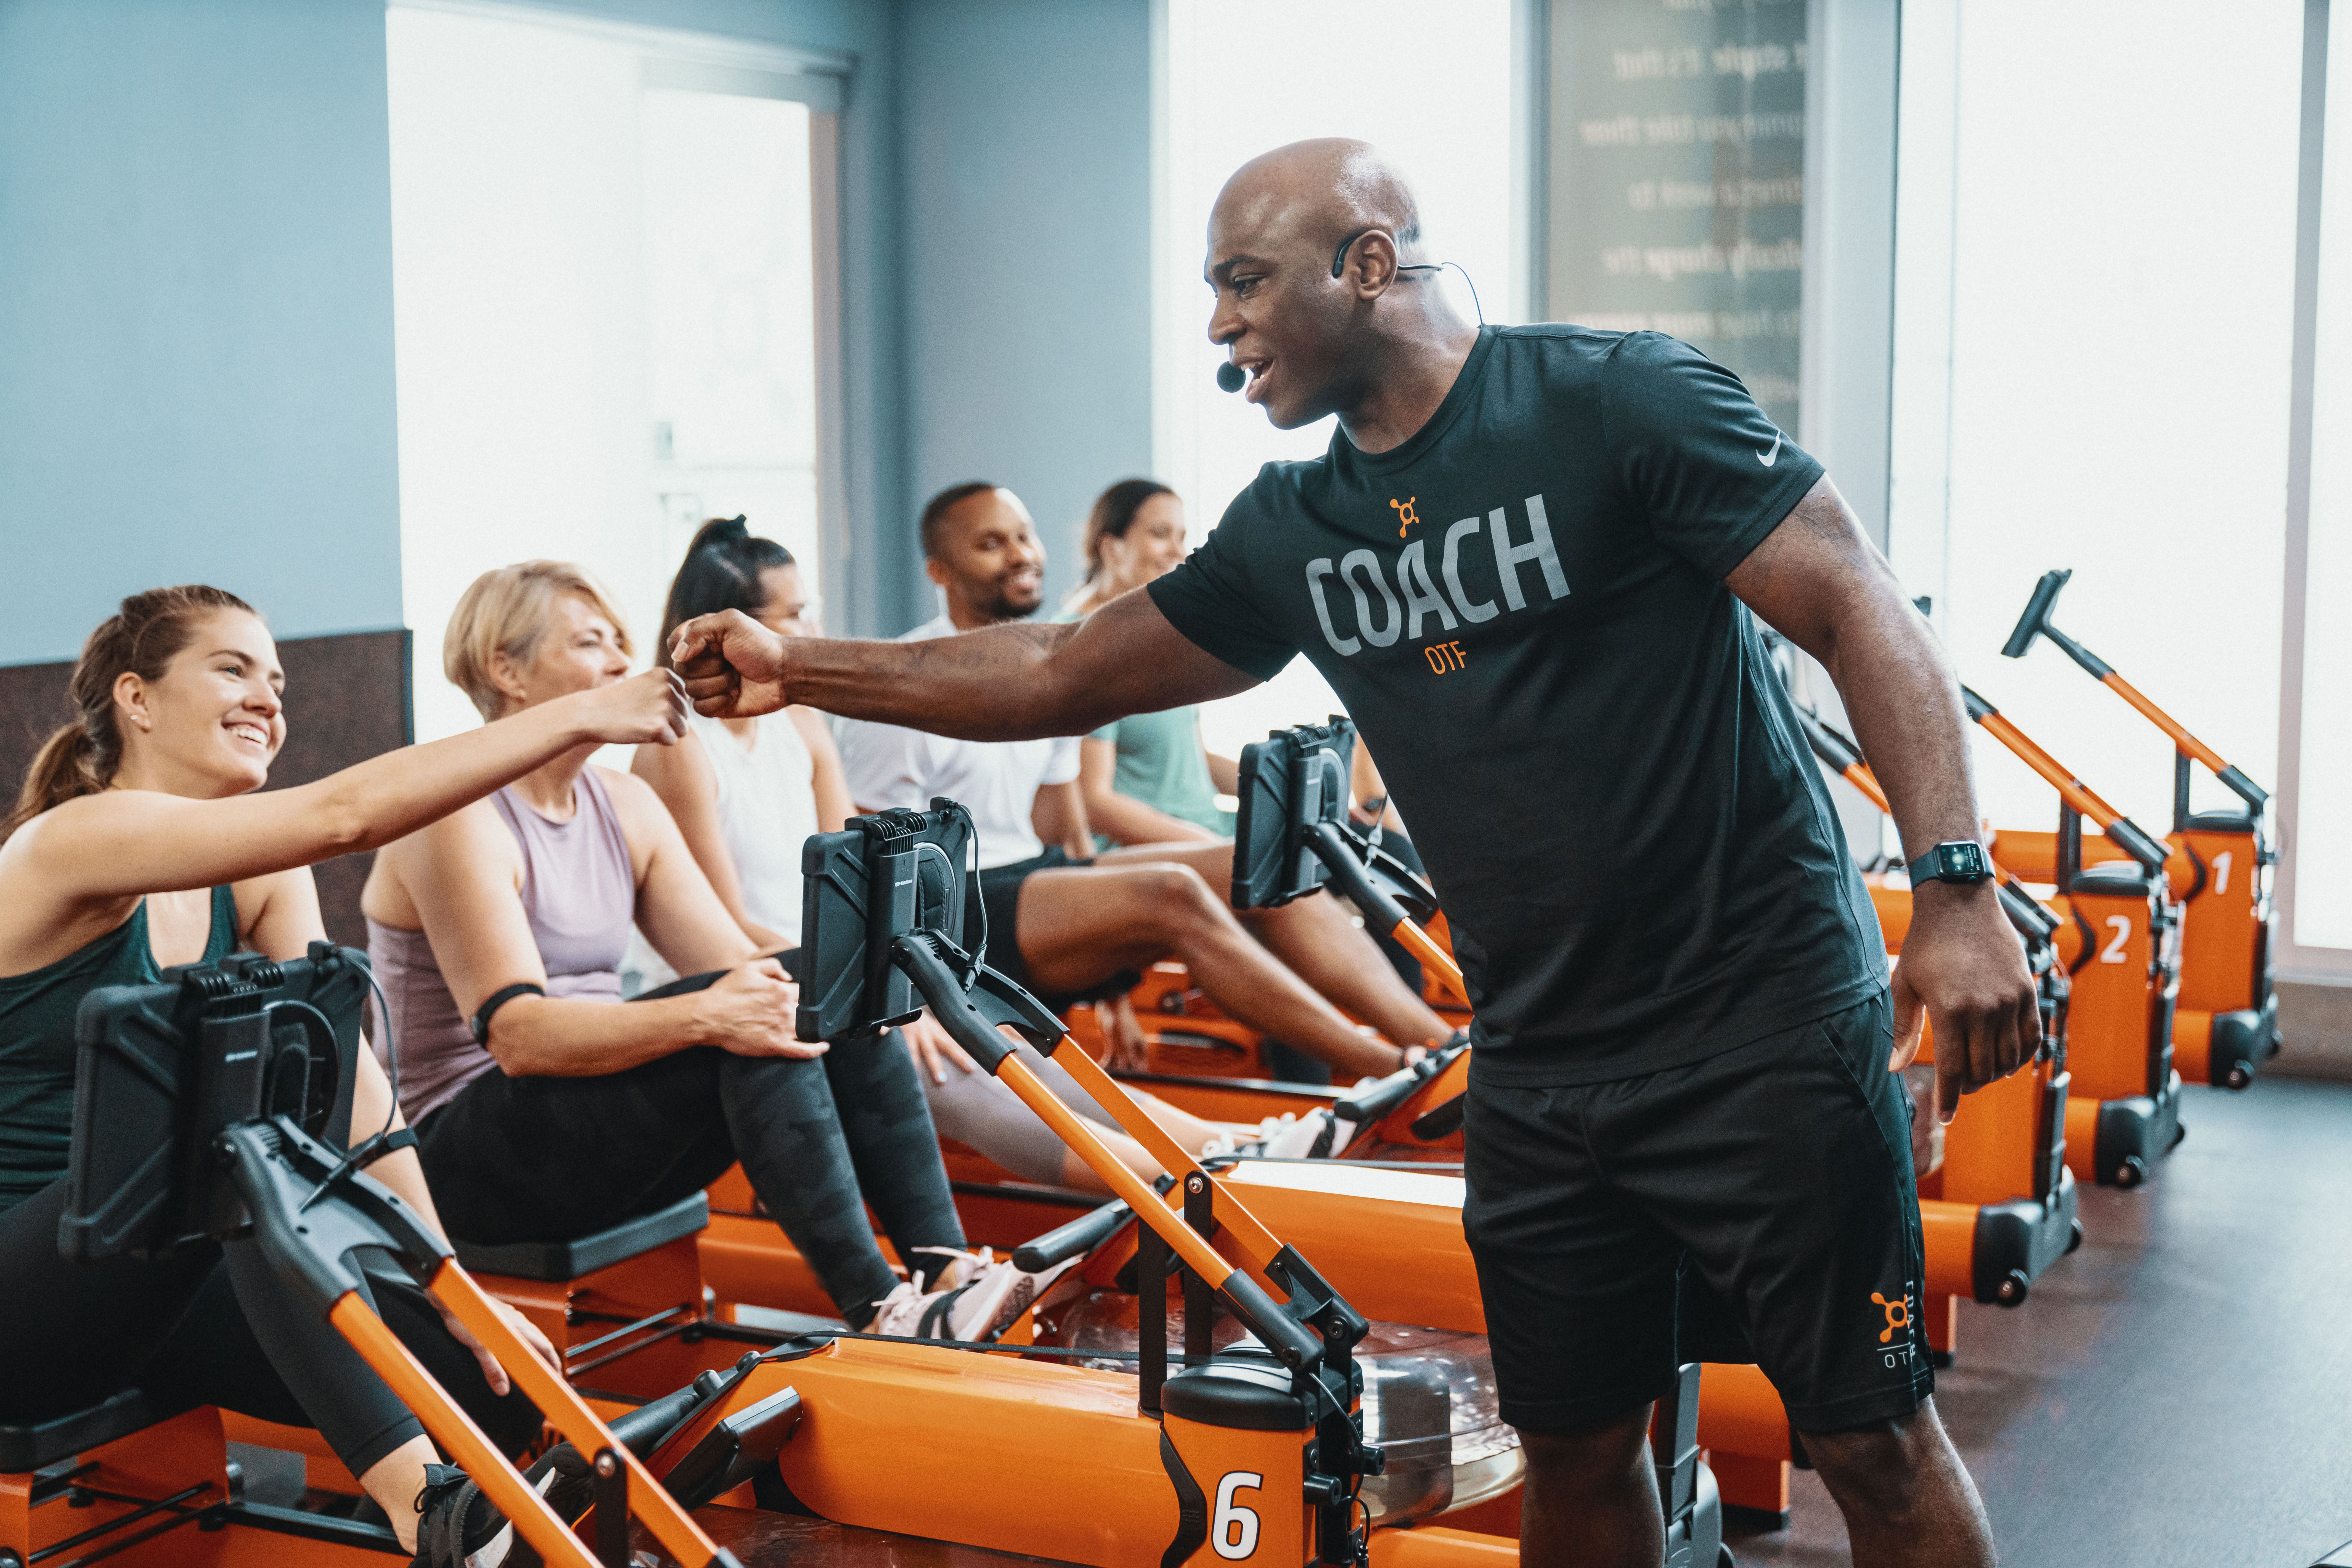 Orangetheory Review: Is The Membership Worth It? - Sports Illustrated